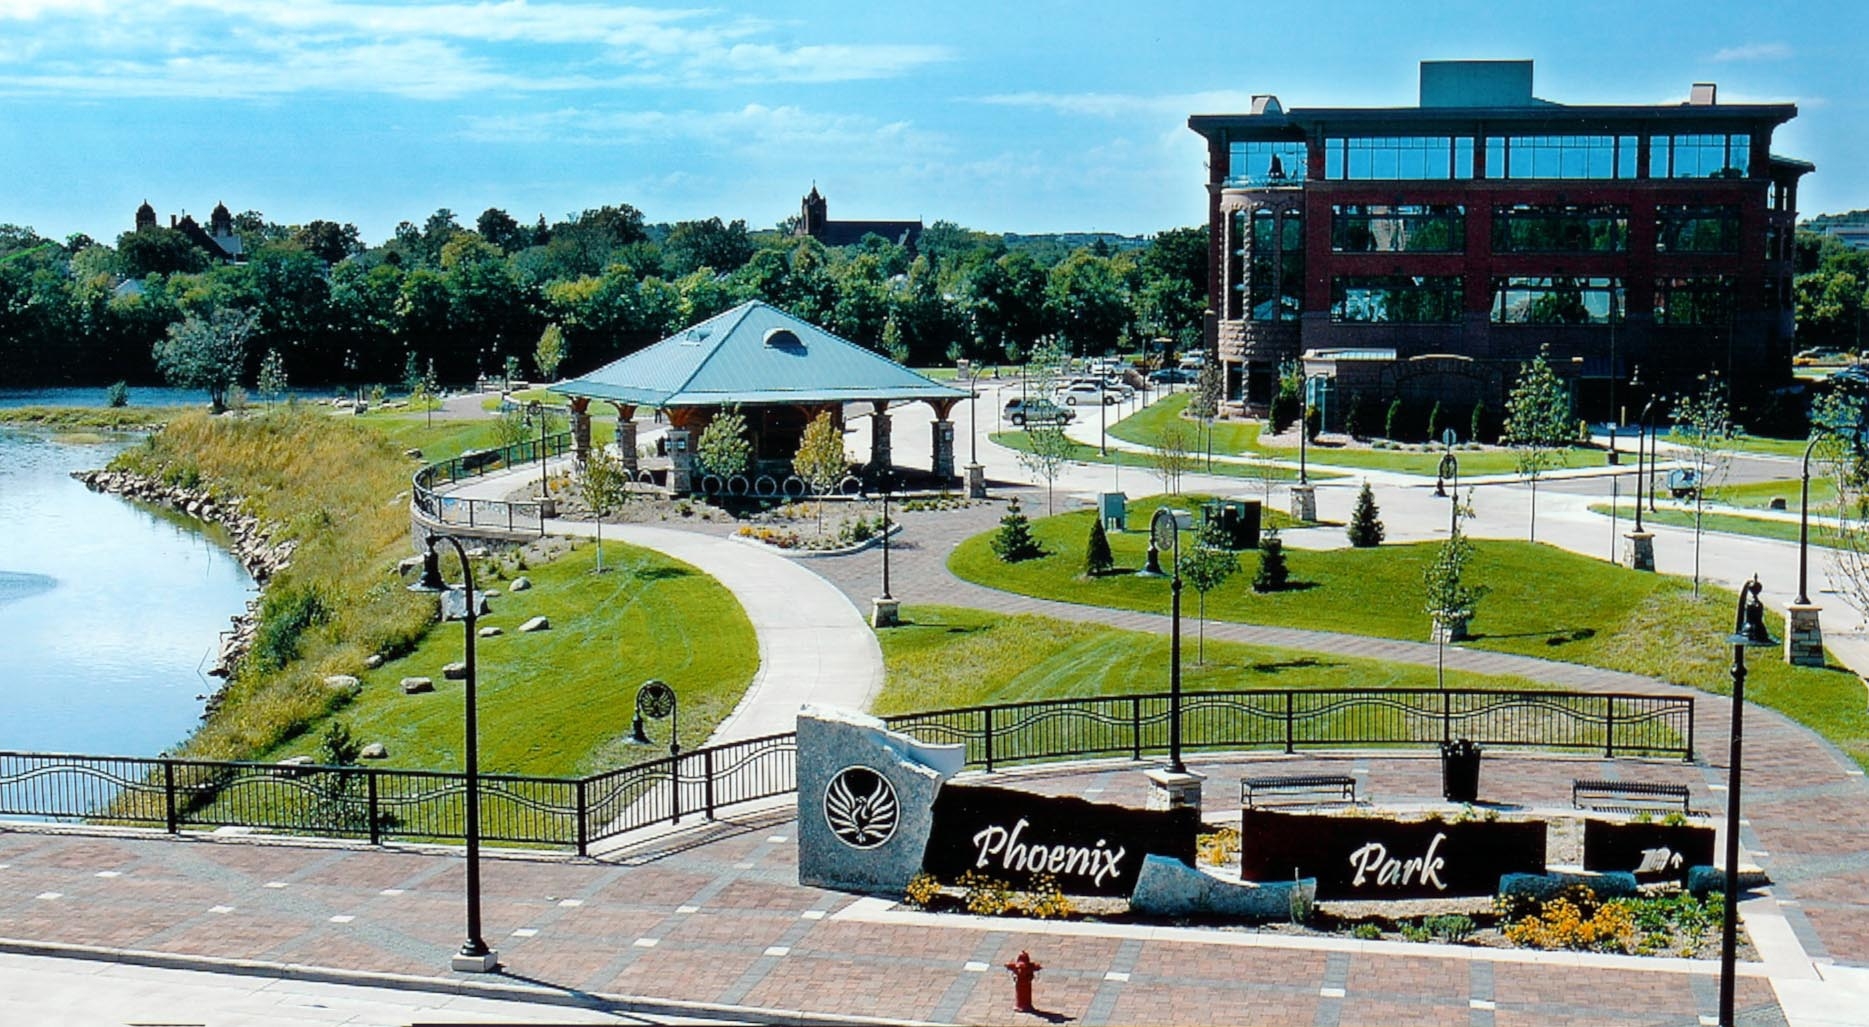 Phoenix Park, a redeveloped brownfield (former industrial site), includes a heritage walk and interpretive stone markers illustrating Eau Claire's history. 